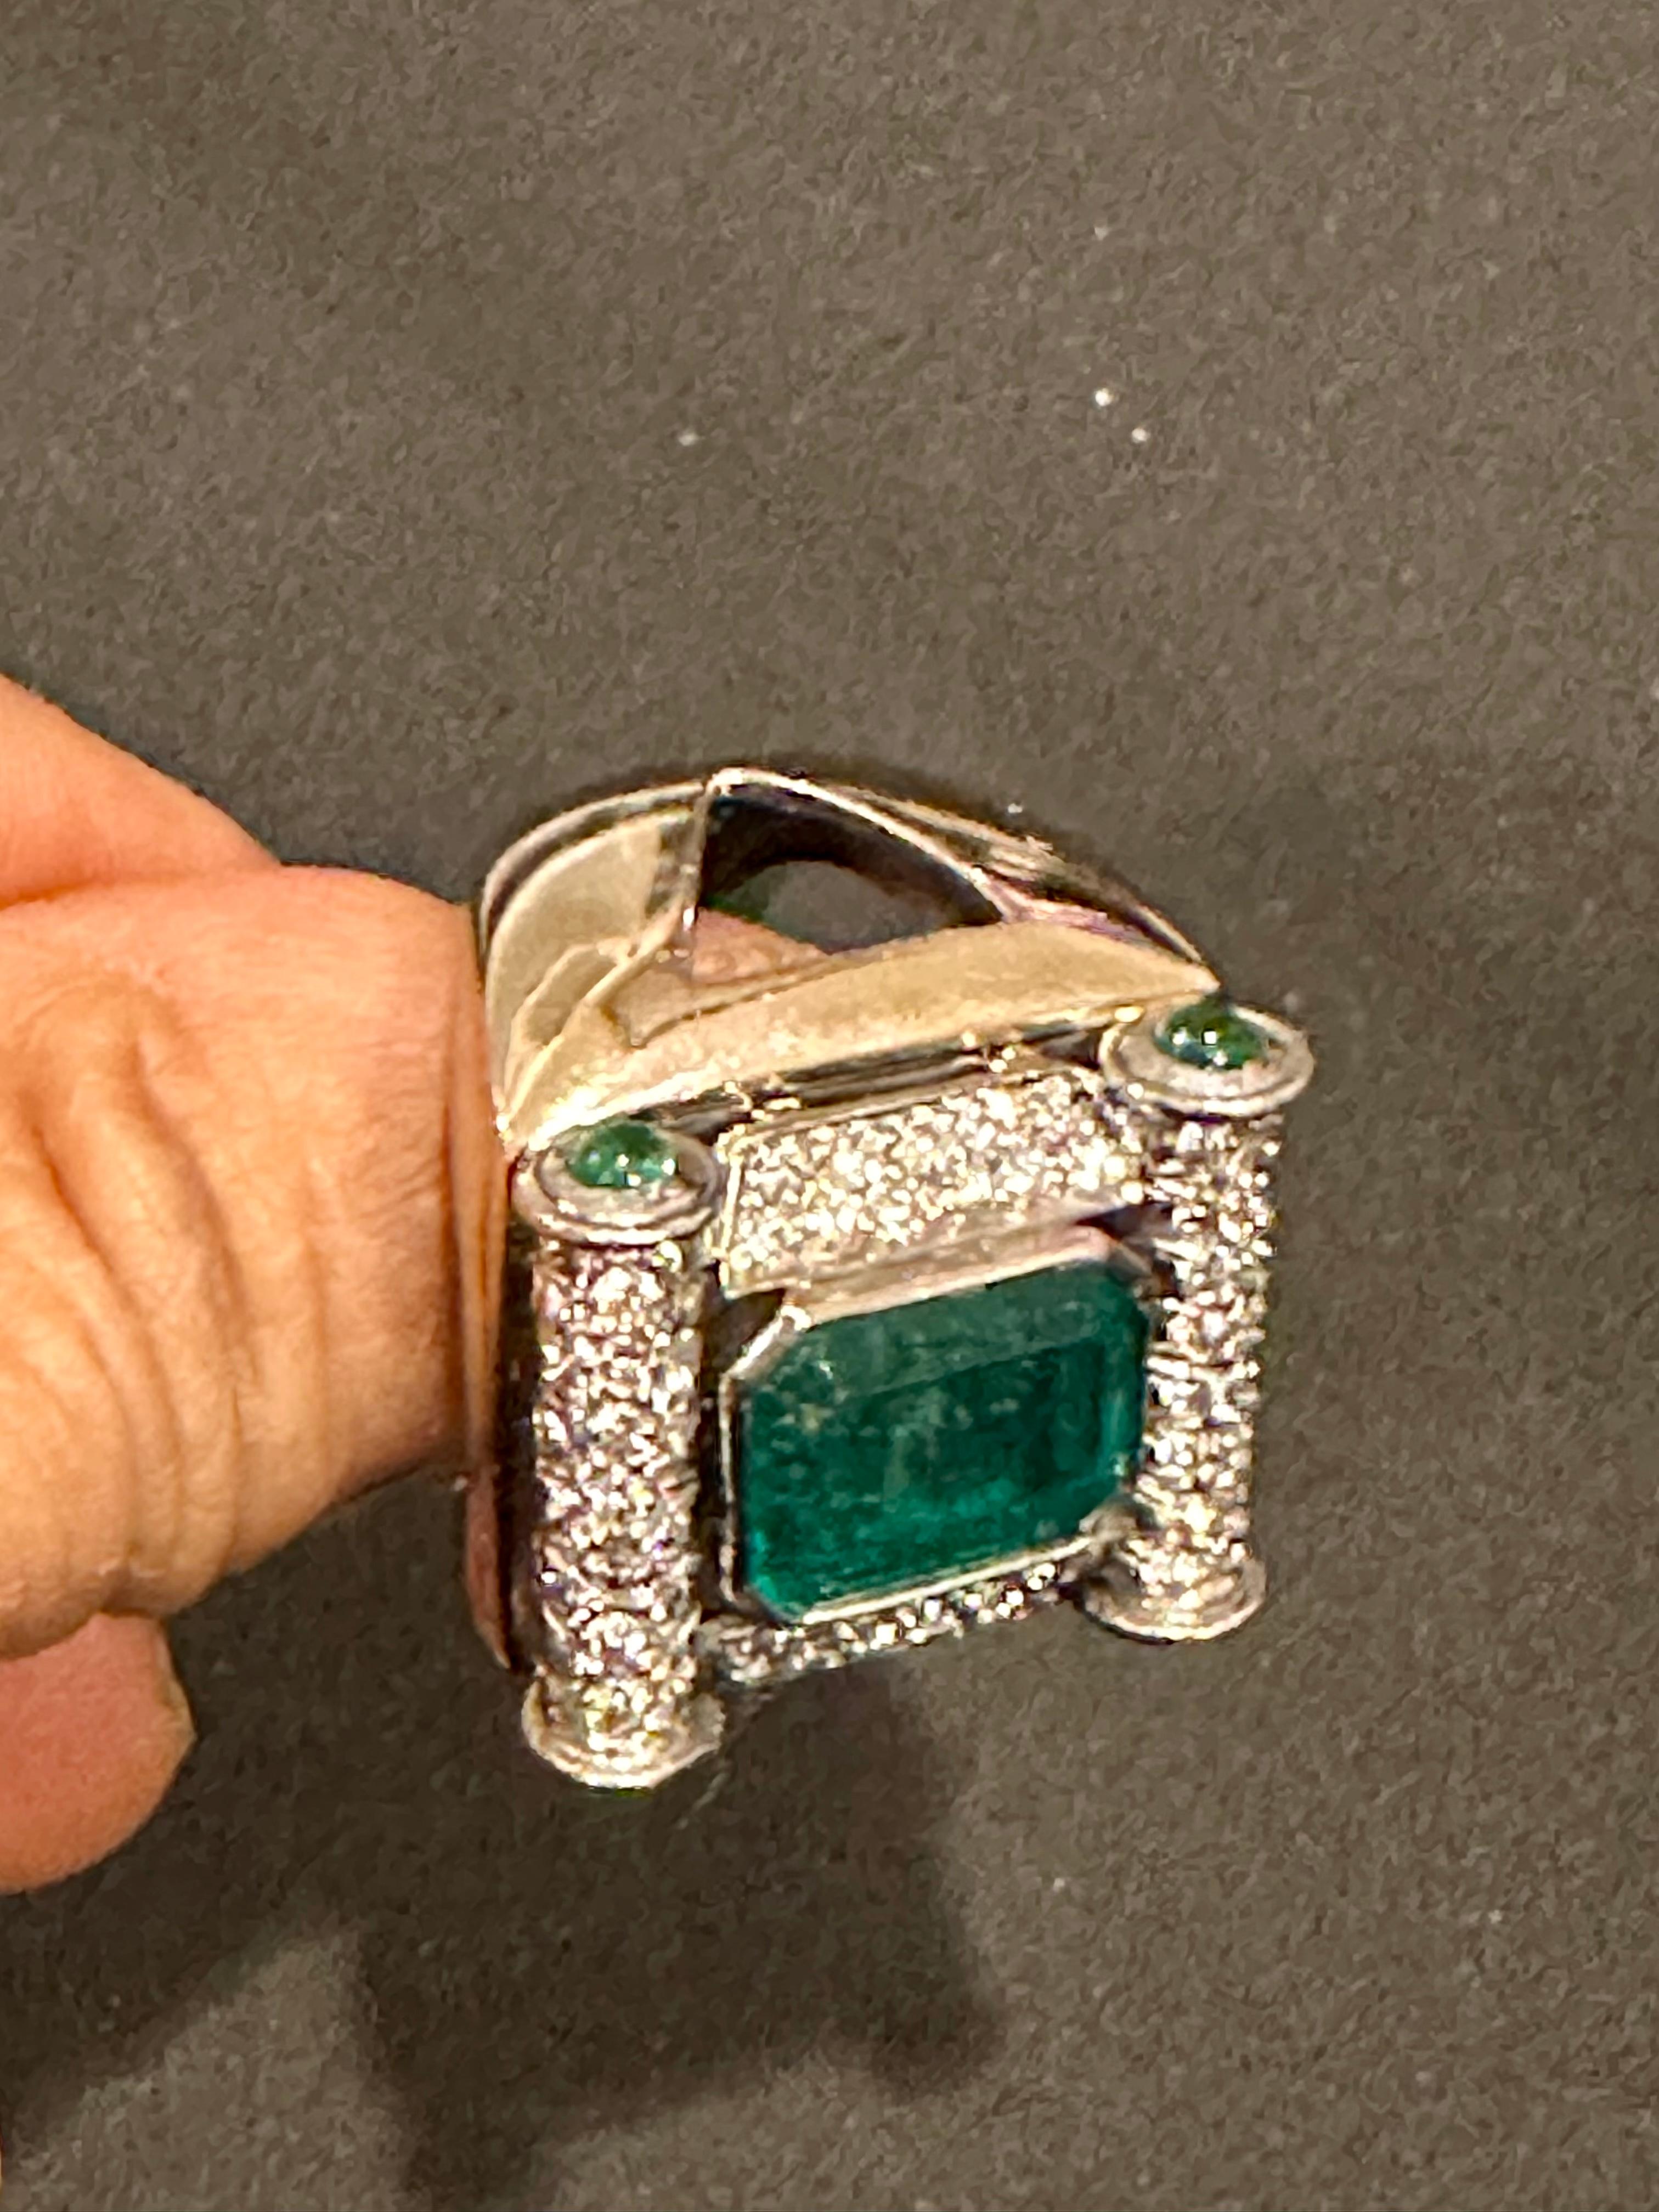 GIA Certified 8ct Emerald Cut Colombian Emerald Diamond  Ring 18kt White Gold In Excellent Condition For Sale In New York, NY